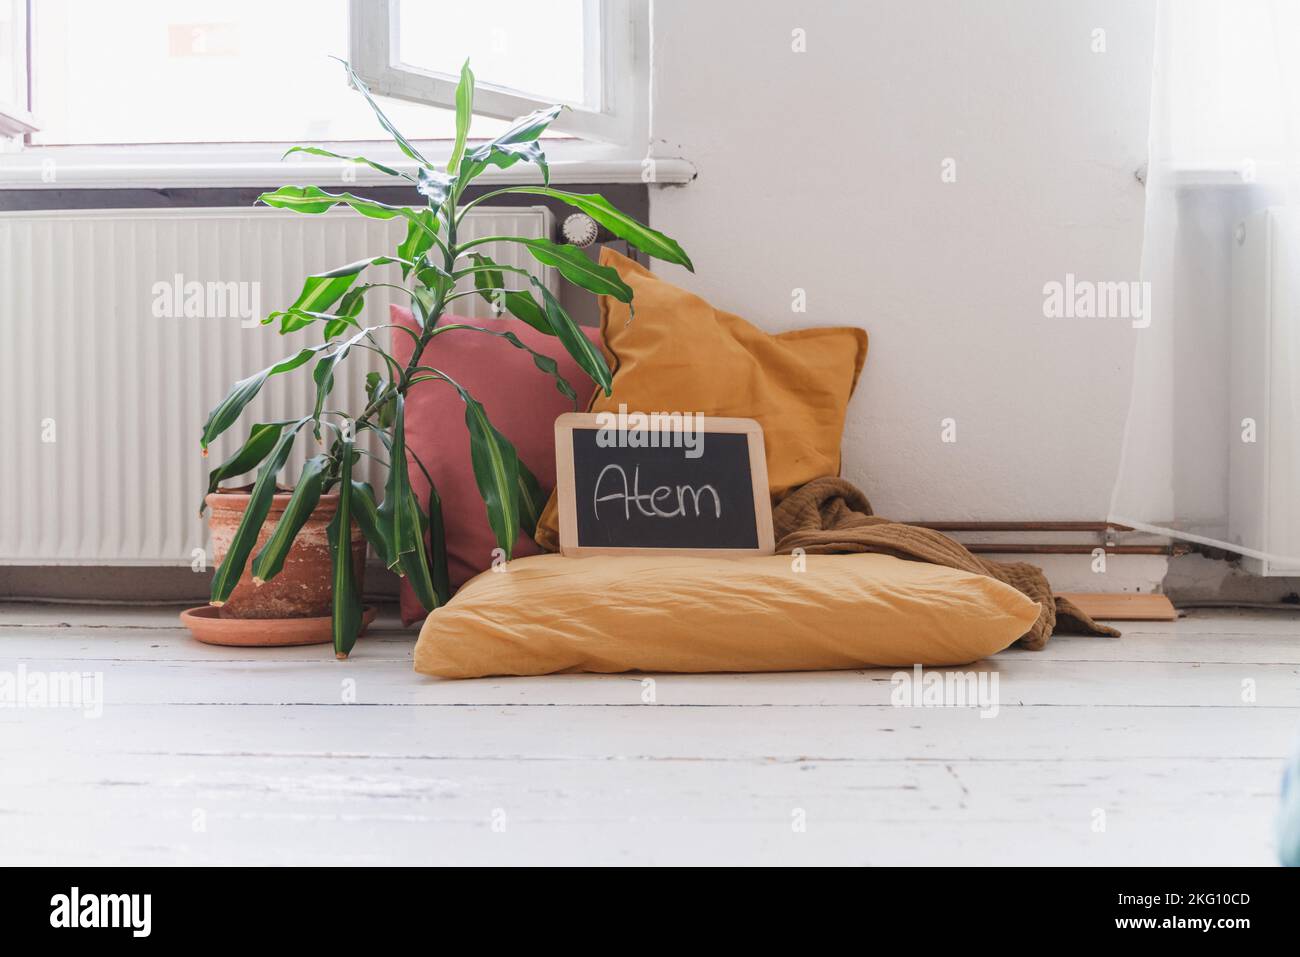 A green plant, yellow pillows, and a small 'Atem' blackboard against a white wall - Hypnobirthing concept Stock Photo